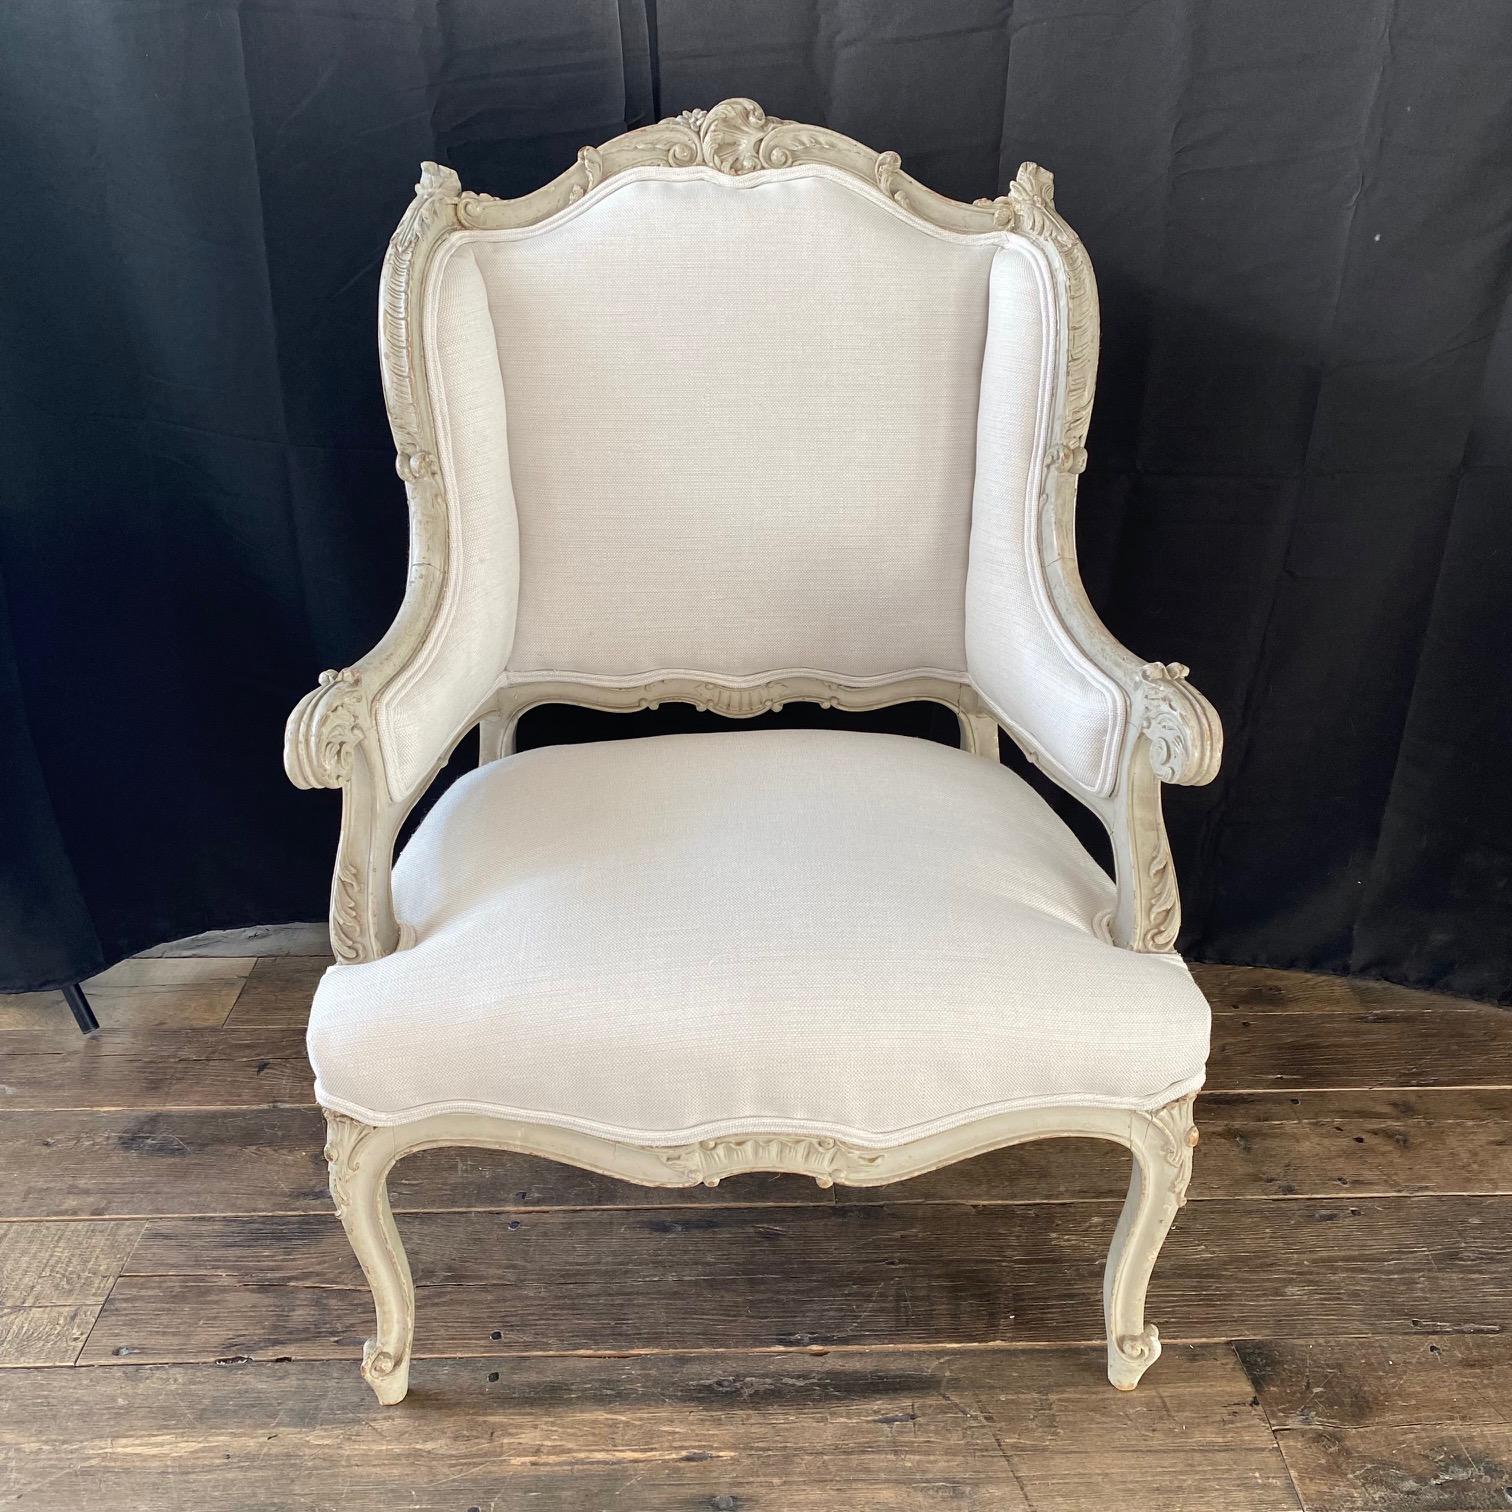 Stunning pair of painted and exquisitely carved French 19th century Louis XV armchairs, wing chairs or bergeres. Beautiful original pale grayish white paint, with new upholstery in high quality complementary neutral white with a touch of the same